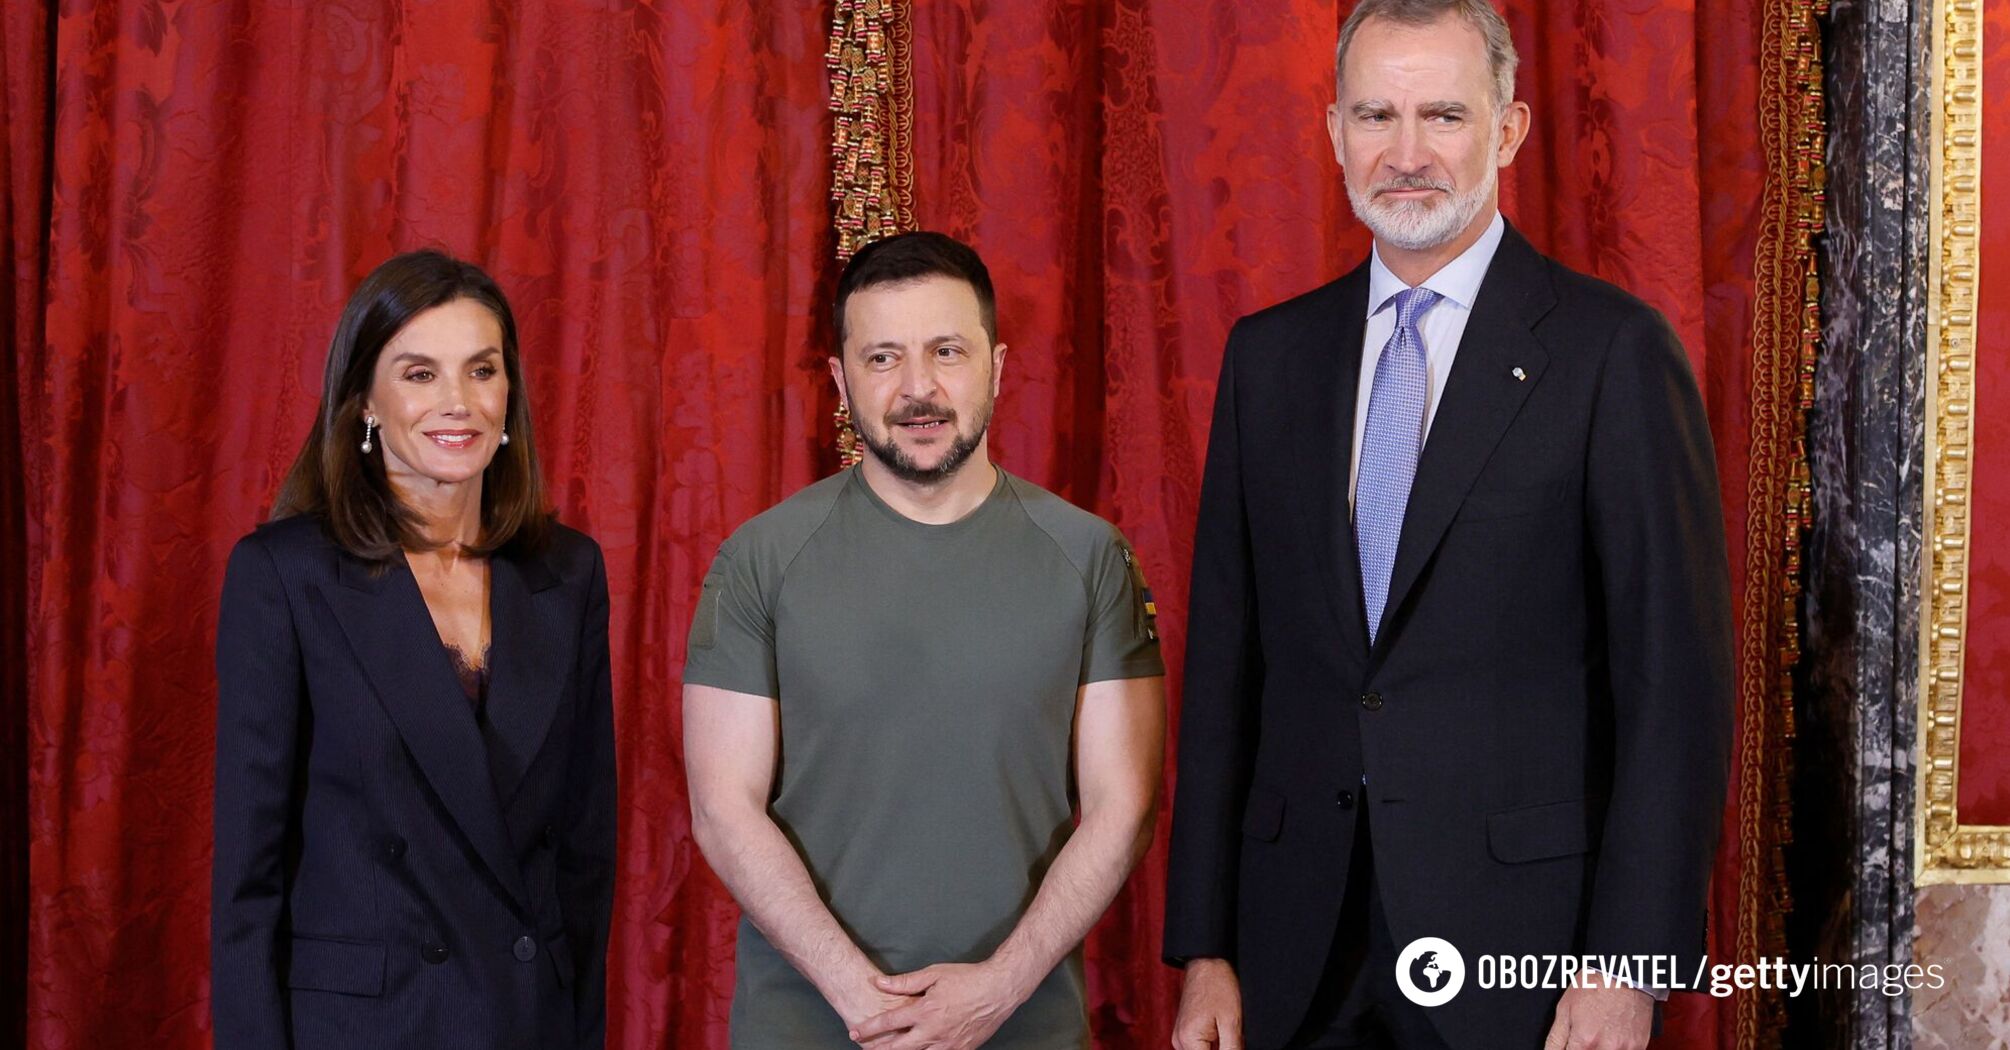 Queen Letizia demonstrated a stylish business image at a meeting with Zelenskyy. Photo